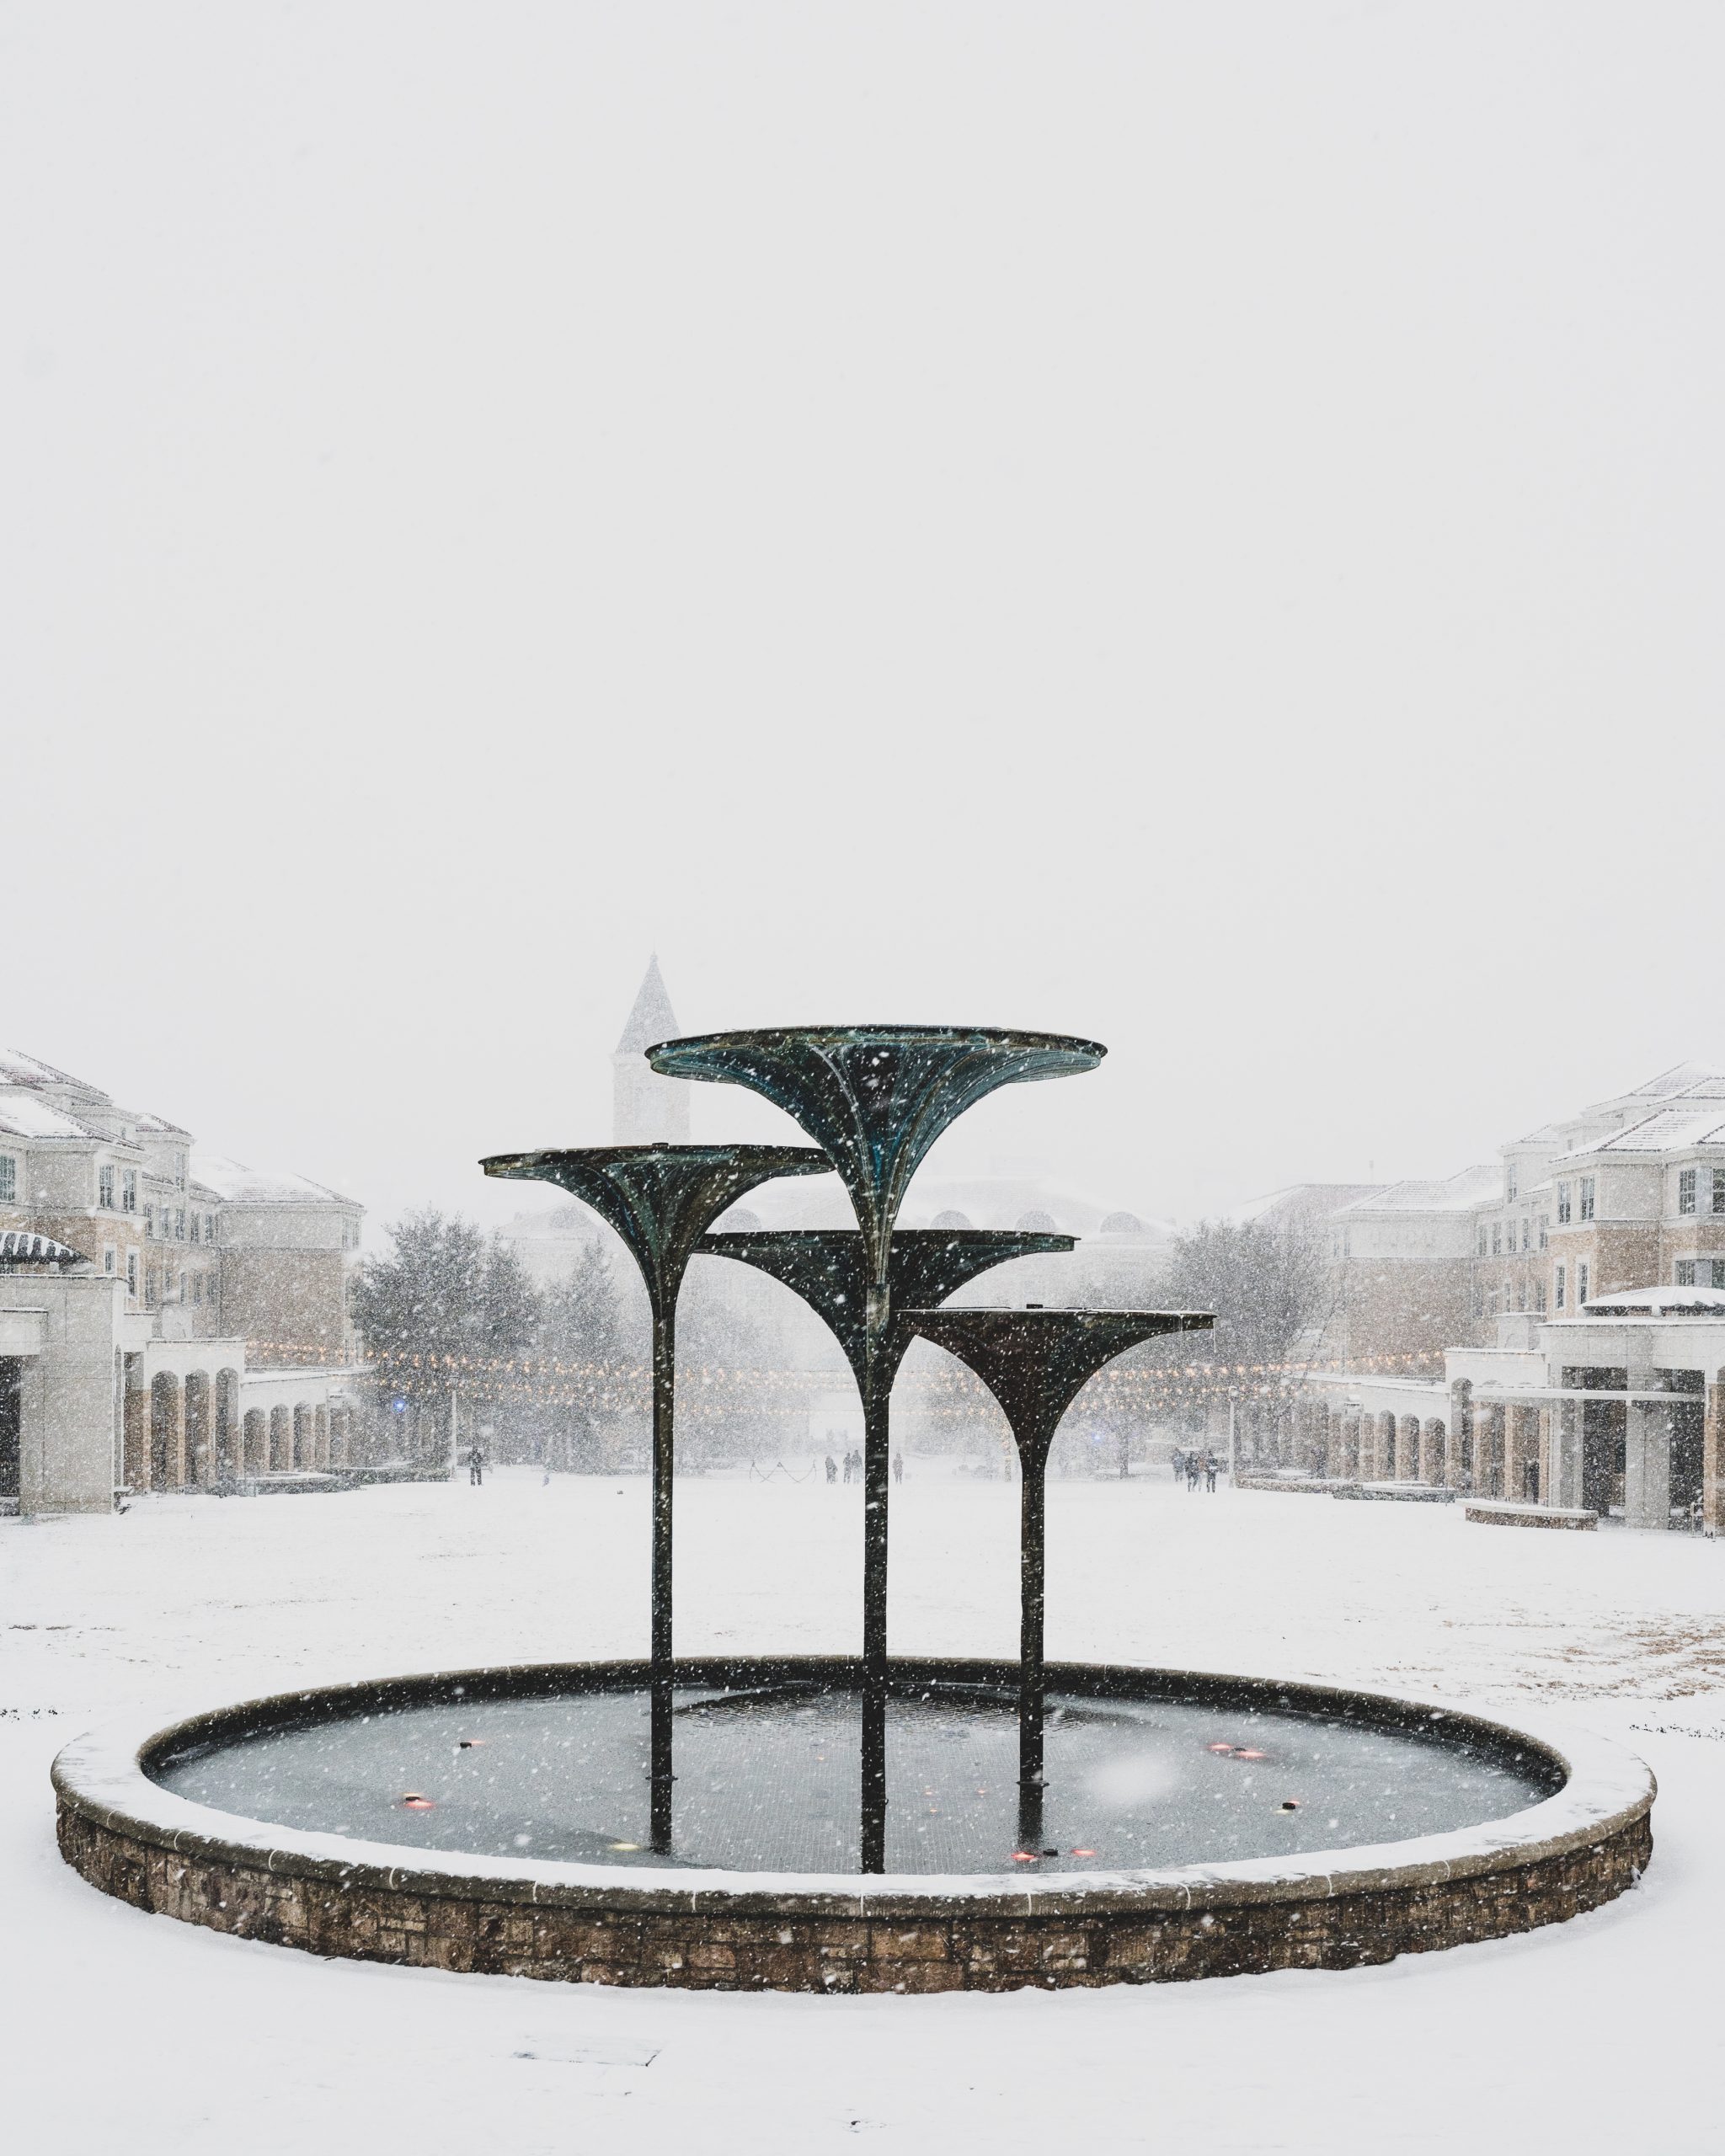 Severe winter weather blanketed the TCU campus in snow, closing the campus for a week of February 15 through 19, 2021. Shown: Frog Fountain. Photo by Eric Sasadeusz (social media intern), February 14, 2021